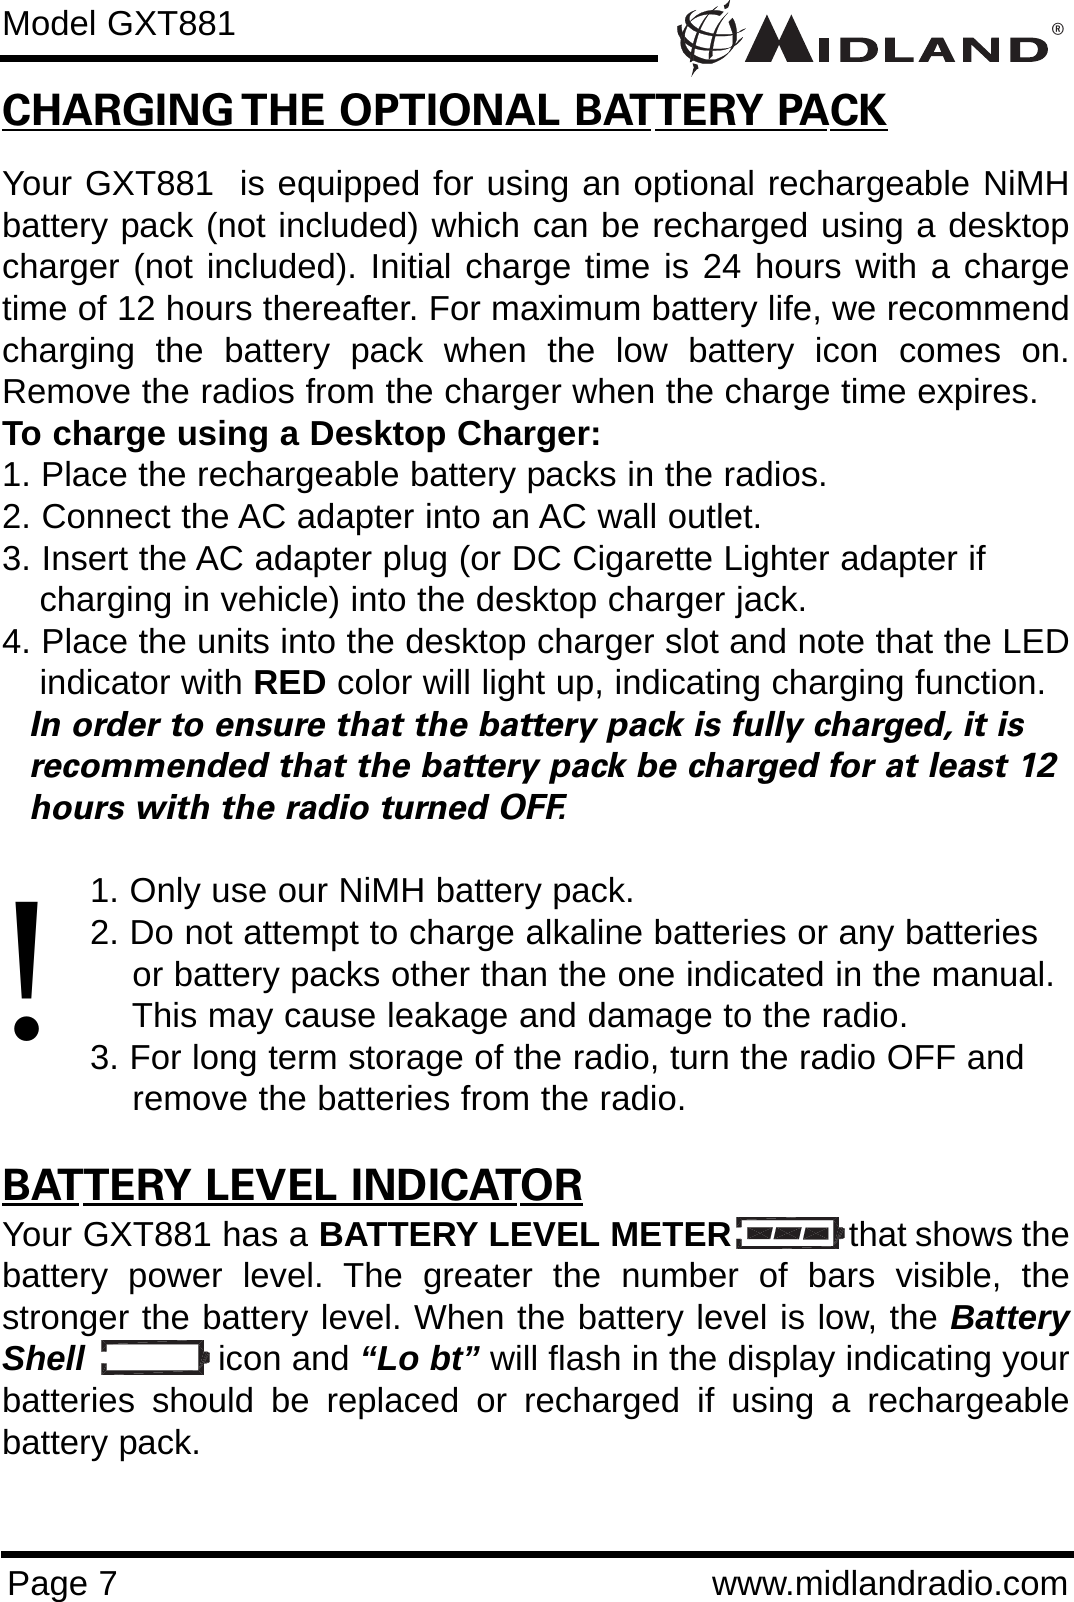 ®Page 7 www.midlandradio.comCHARGING THE OPTIONAL BATTERY PACKYour GXT881  is equipped for using an optional rechargeable NiMHbattery pack (not included) which can be recharged using a desktopcharger (not included). Initial charge time is 24 hours with a chargetime of 12 hours thereafter. For maximum battery life, we recommendcharging the battery pack when the low battery icon comes on.Remove the radios from the charger when the charge time expires.To charge using a Desktop Charger:1. Place the rechargeable battery packs in the radios.2. Connect the AC adapter into an AC wall outlet.3. Insert the AC adapter plug (or DC Cigarette Lighter adapter if    charging in vehicle) into the desktop charger jack.4. Place the units into the desktop charger slot and note that the LEDindicator with RED color will light up, indicating charging function. In order to ensure that the battery pack is fully charged, it is  recommended that the battery pack be charged for at least 12 hours with the radio turned OFF.1. Only use our NiMH battery pack.2. Do not attempt to charge alkaline batteries or any batteries or battery packs other than the one indicated in the manual. This may cause leakage and damage to the radio.3. For long term storage of the radio, turn the radio OFF and remove the batteries from the radio.BATTERY LEVEL INDICATORYour GXT881 has a BATTERY LEVEL METER that shows thebattery power level. The greater the number of bars visible, thestronger the battery level. When the battery level is low, the BatteryShell icon and “Lo bt” will flash in the display indicating yourbatteries should be replaced or recharged if using a rechargeablebattery pack.Model GXT881!